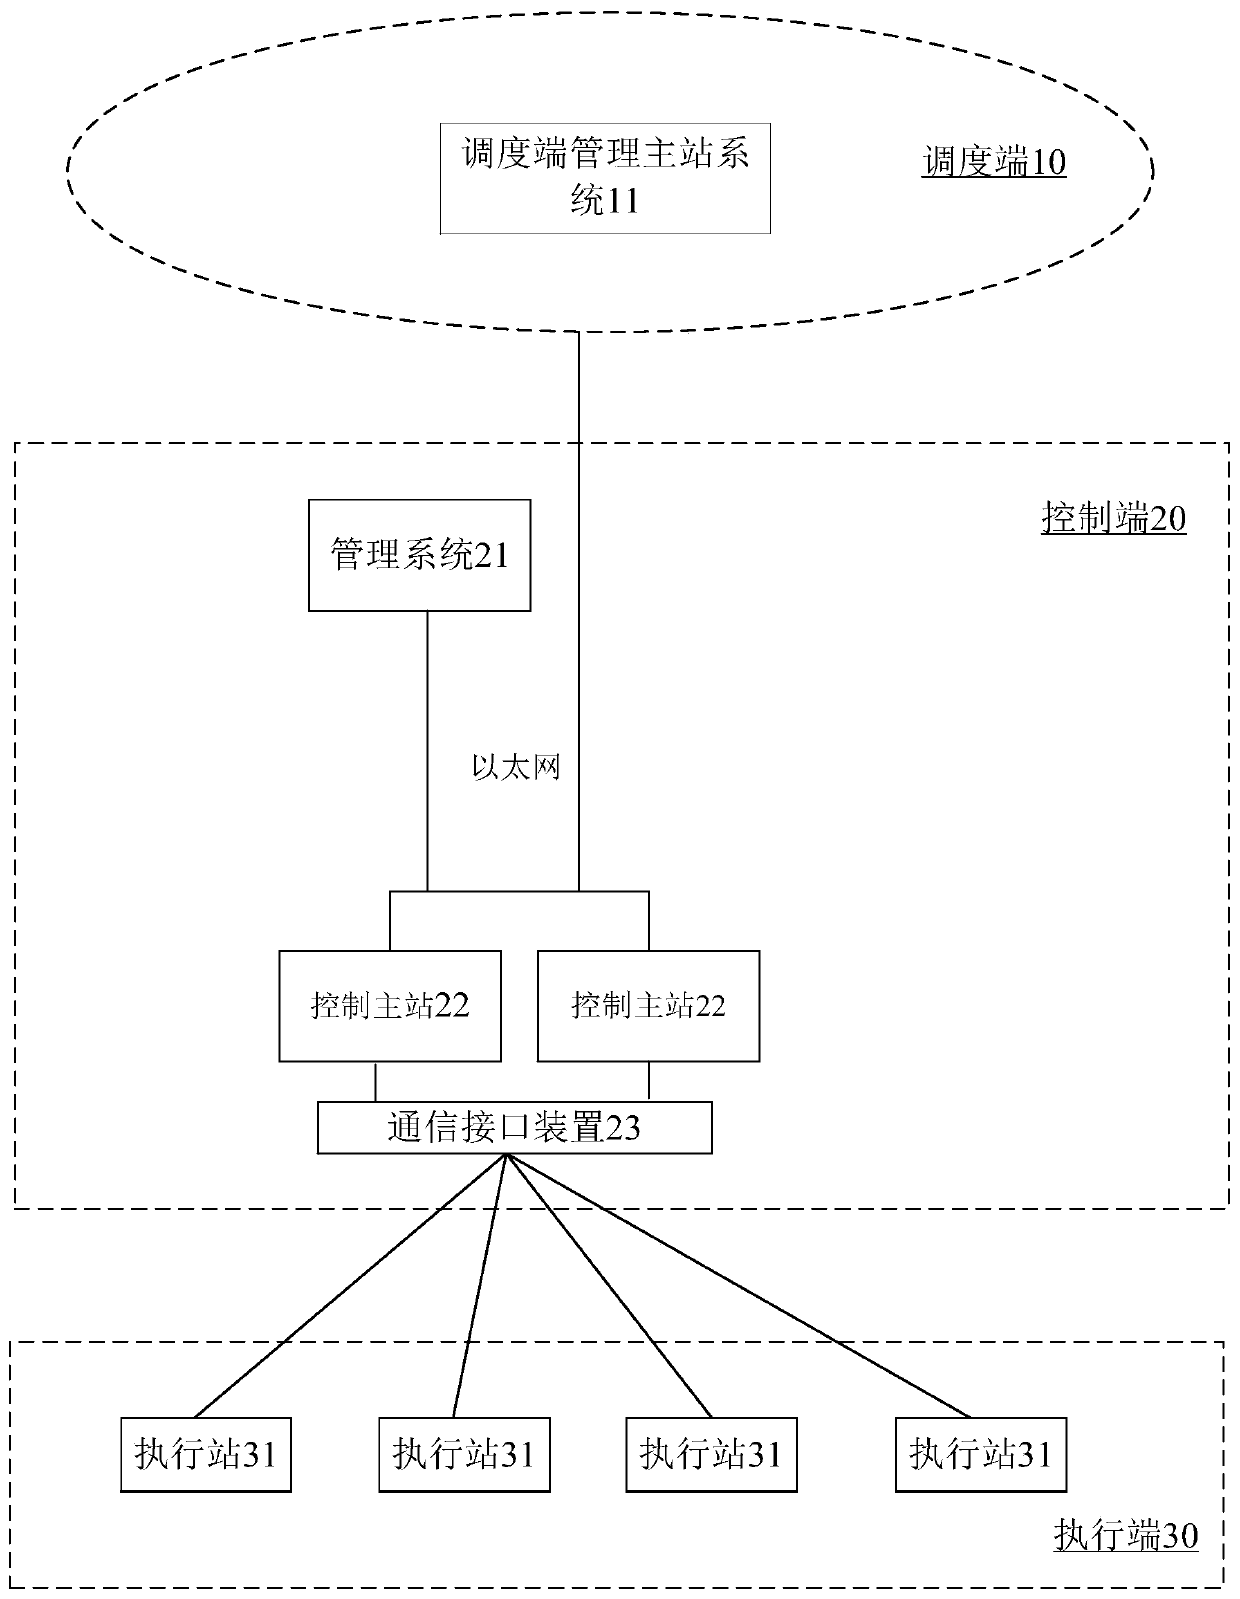 Network security protection method suitable for high-frequency emergency control system